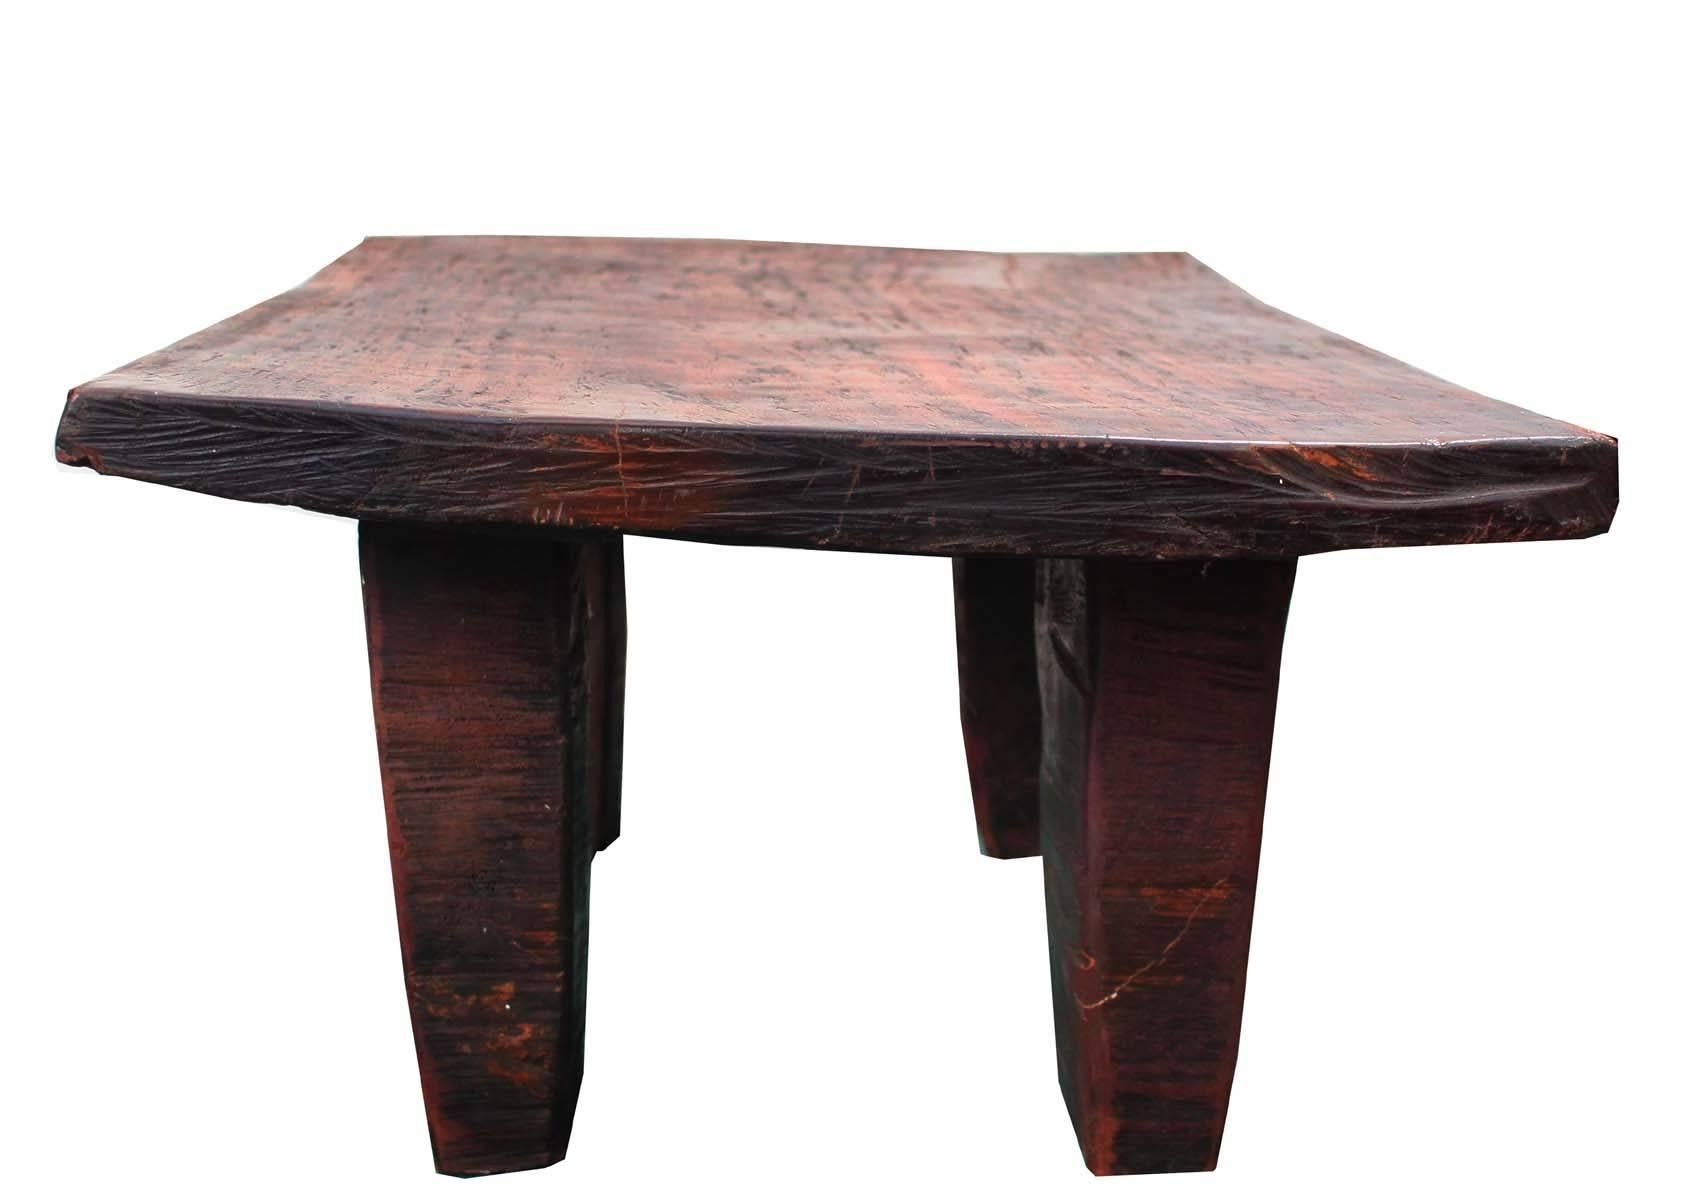 Hand-carved African child's bed, These antiquities make great tables with the clean lines and beautiful rich wood. Hand-carved and finished this is both unique and visually stunning.